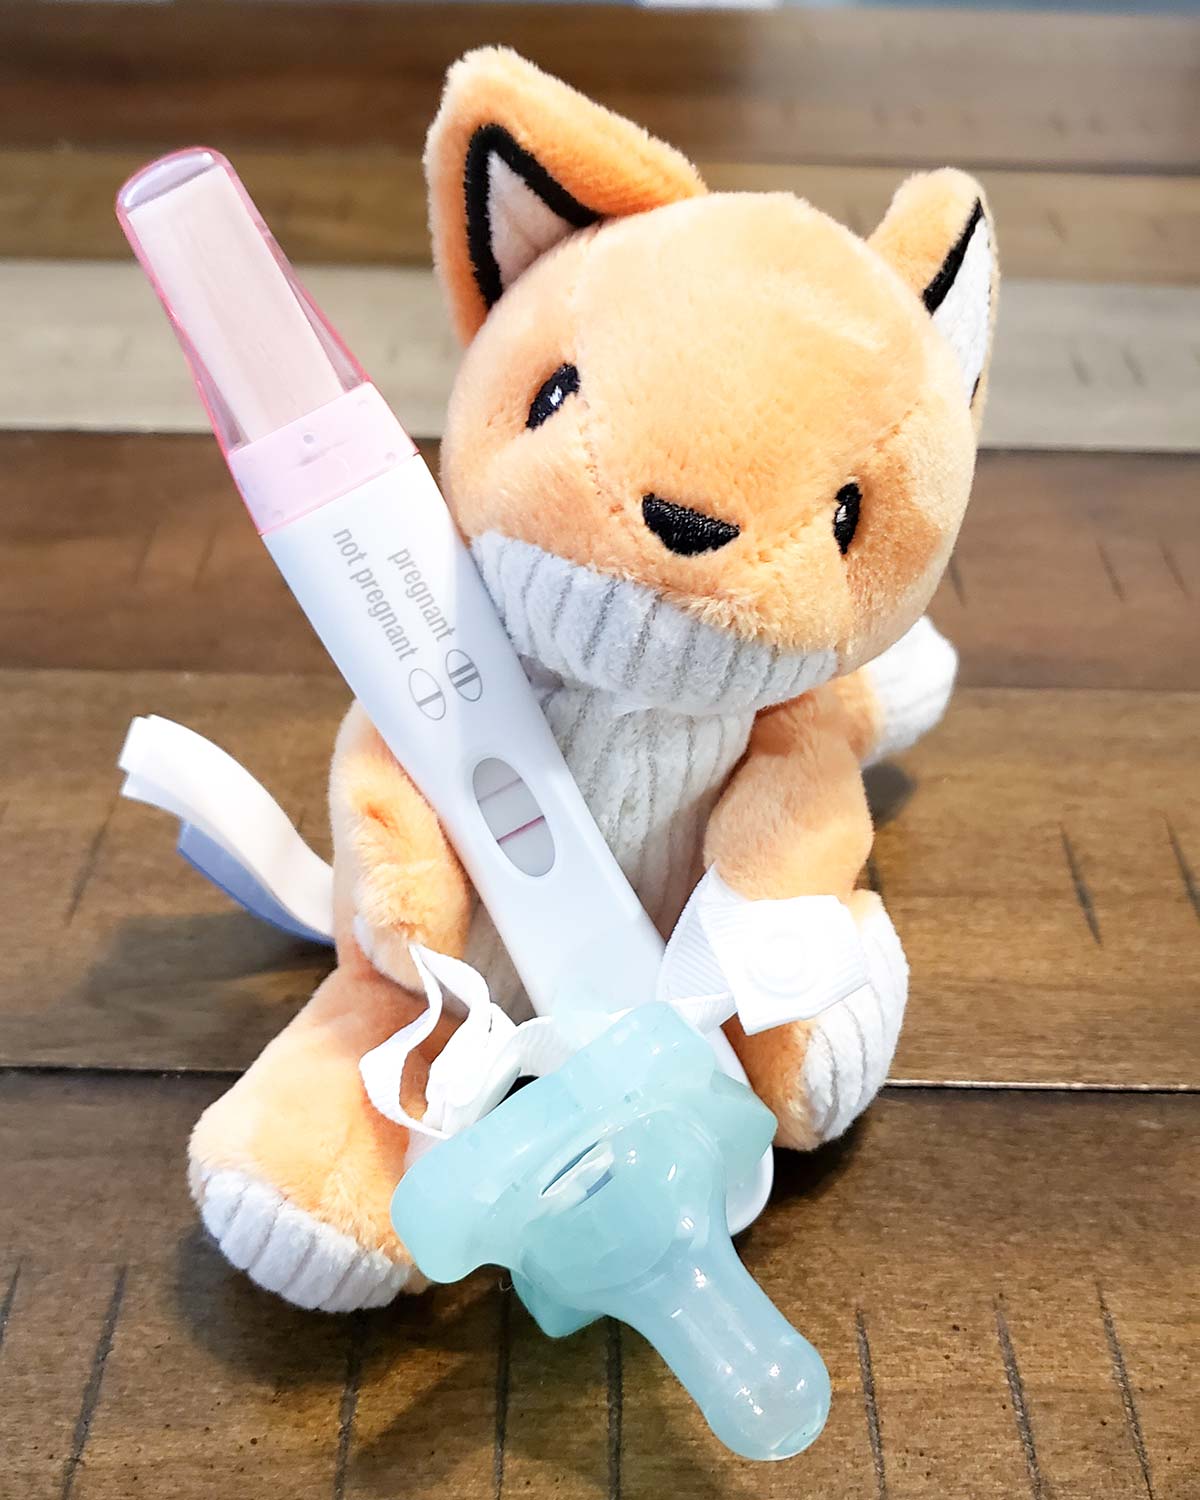 Positive pregnancy is placed in the arms of a stuffed fox along with a blue pacifier